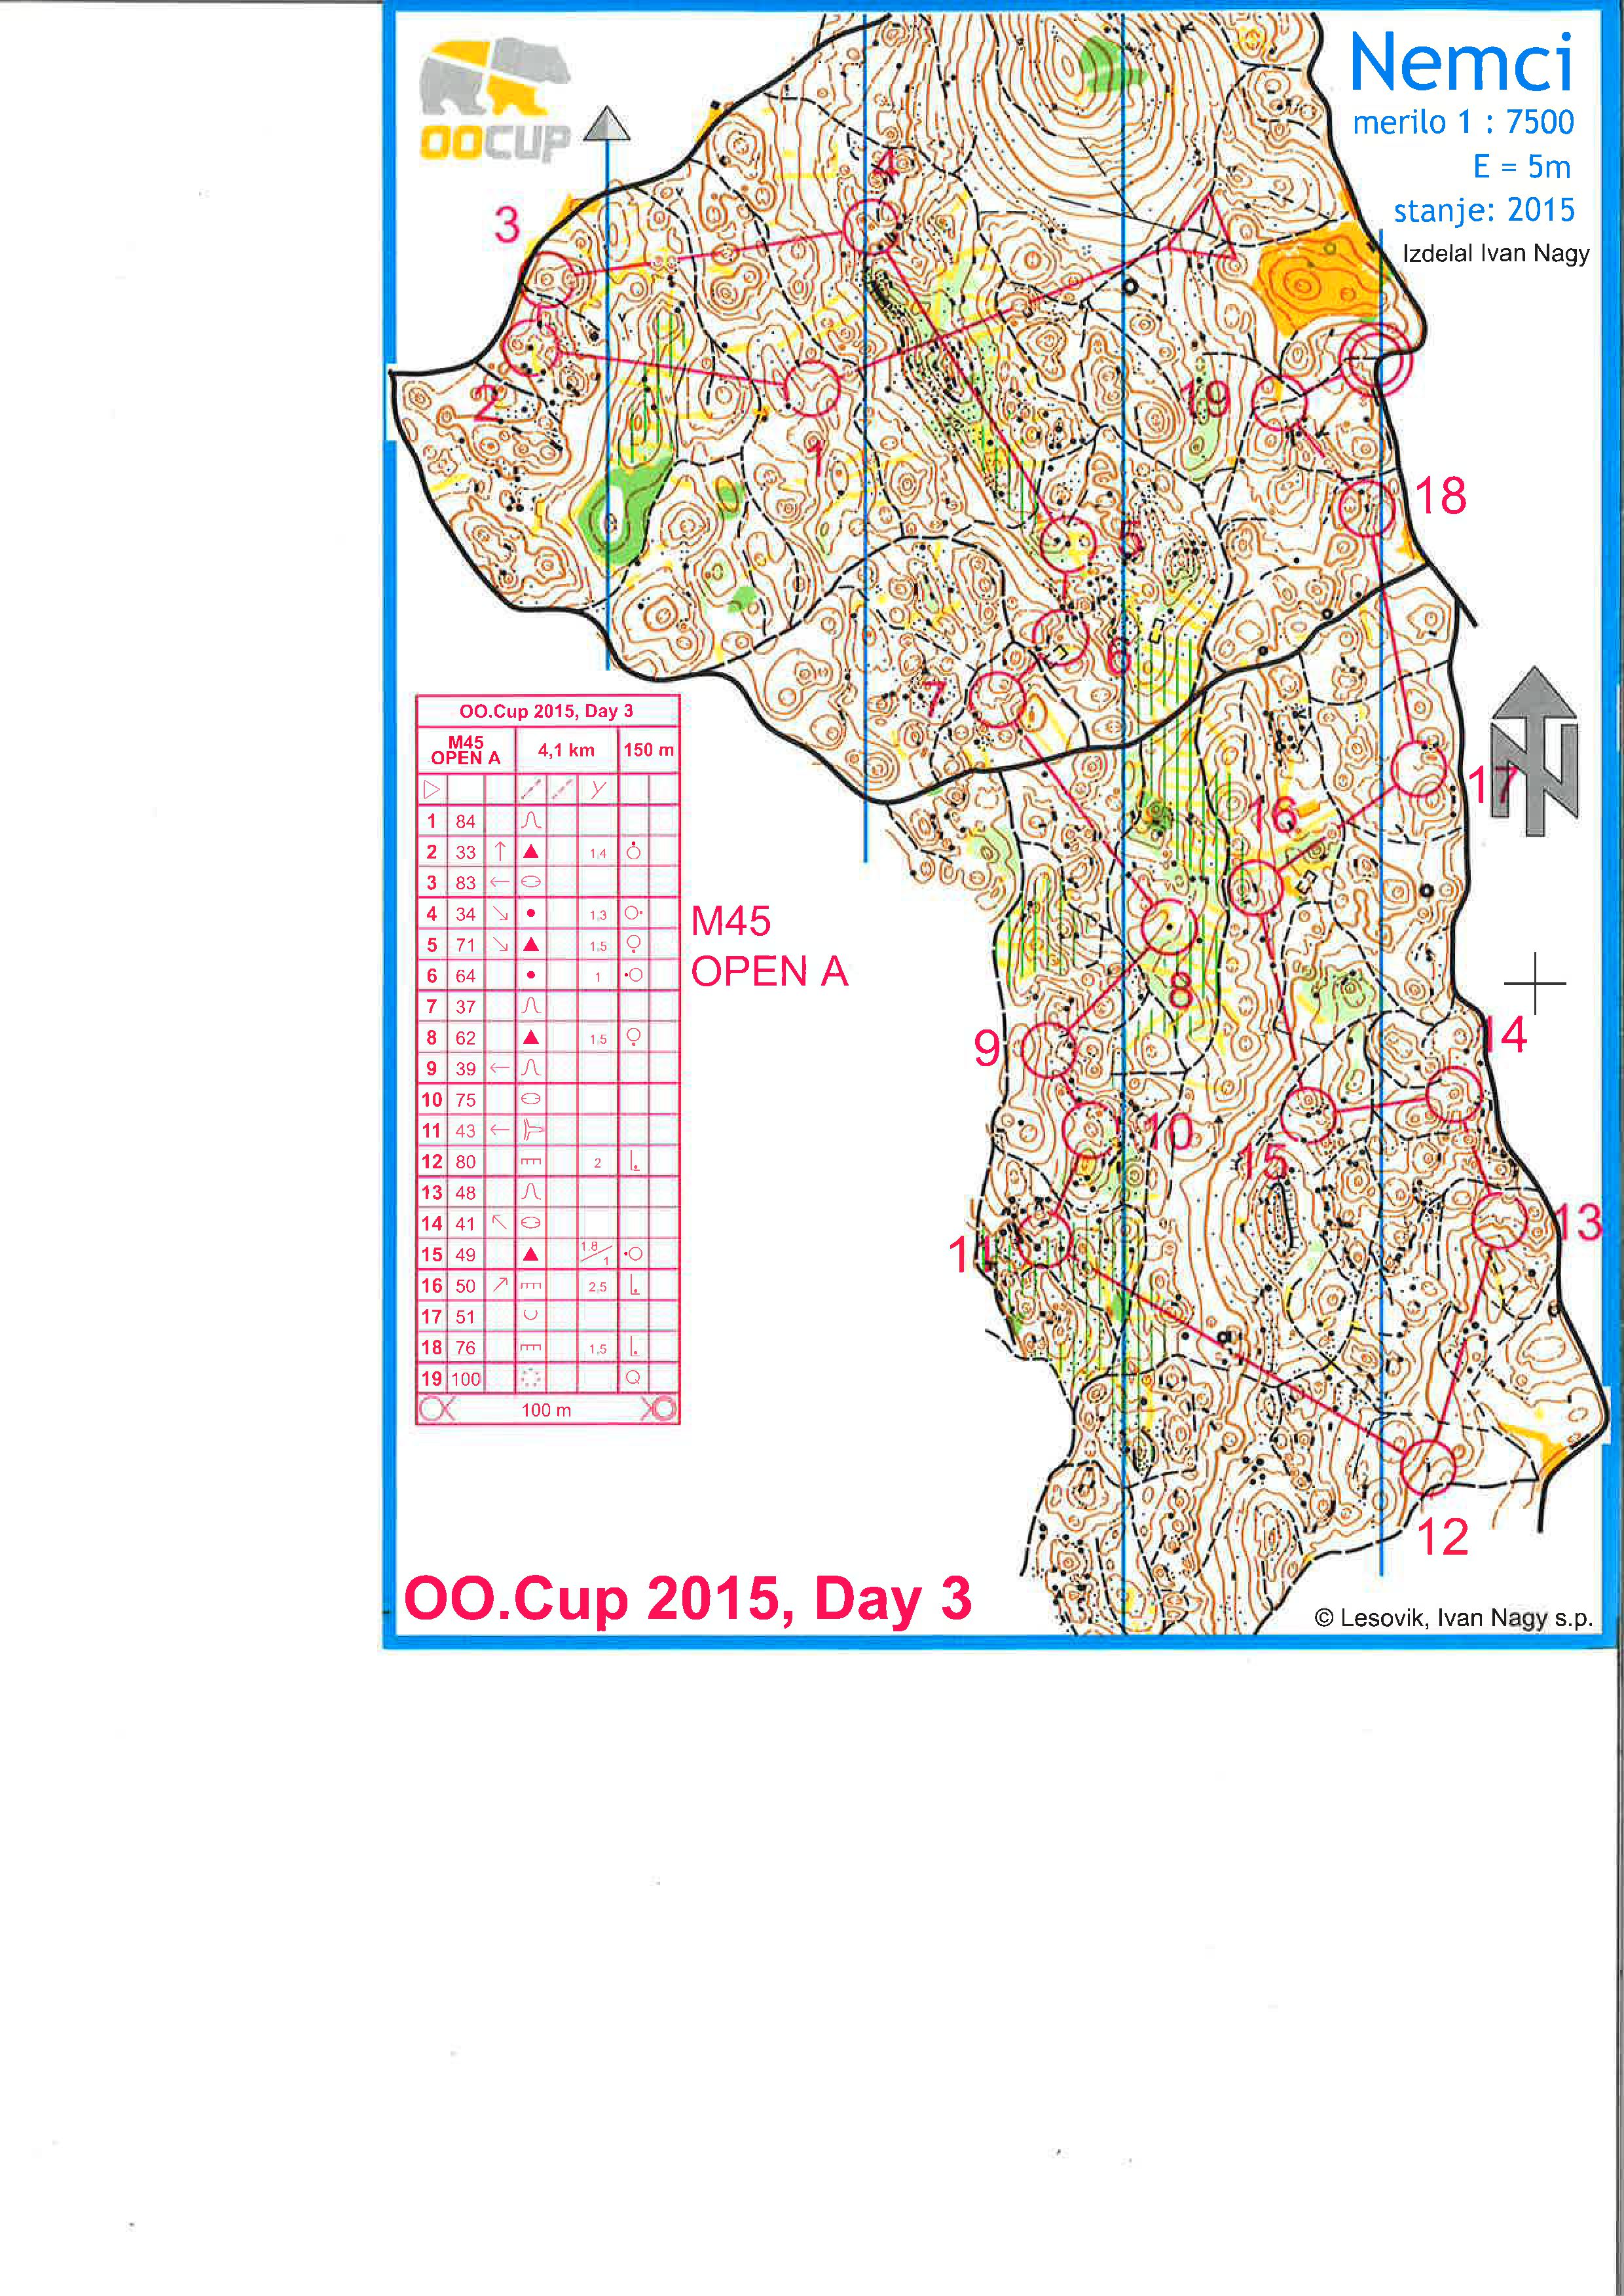 OOCup-Day3 (27/07/2015)